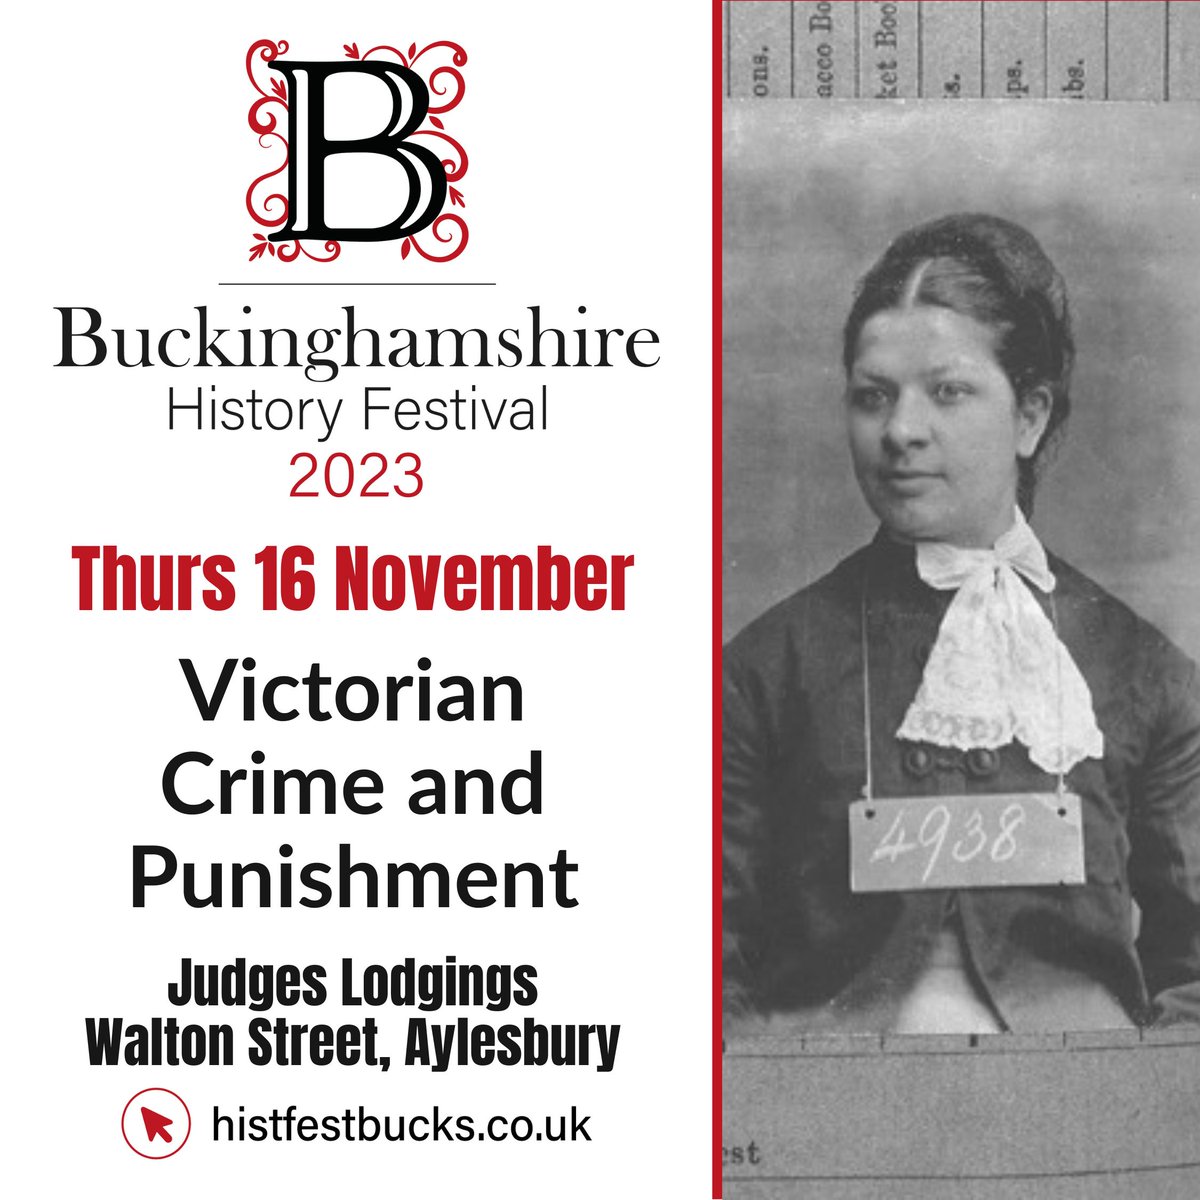 Only a few more spaces available for tomorrow's talk on Victorian Crime and Punishment! Join Daniel, our County Archivist, in the Judges Lodgings in Aylesbury at 3pm. Email us at archives@buckinghamshire.gov.uk to book your free space before it goes!